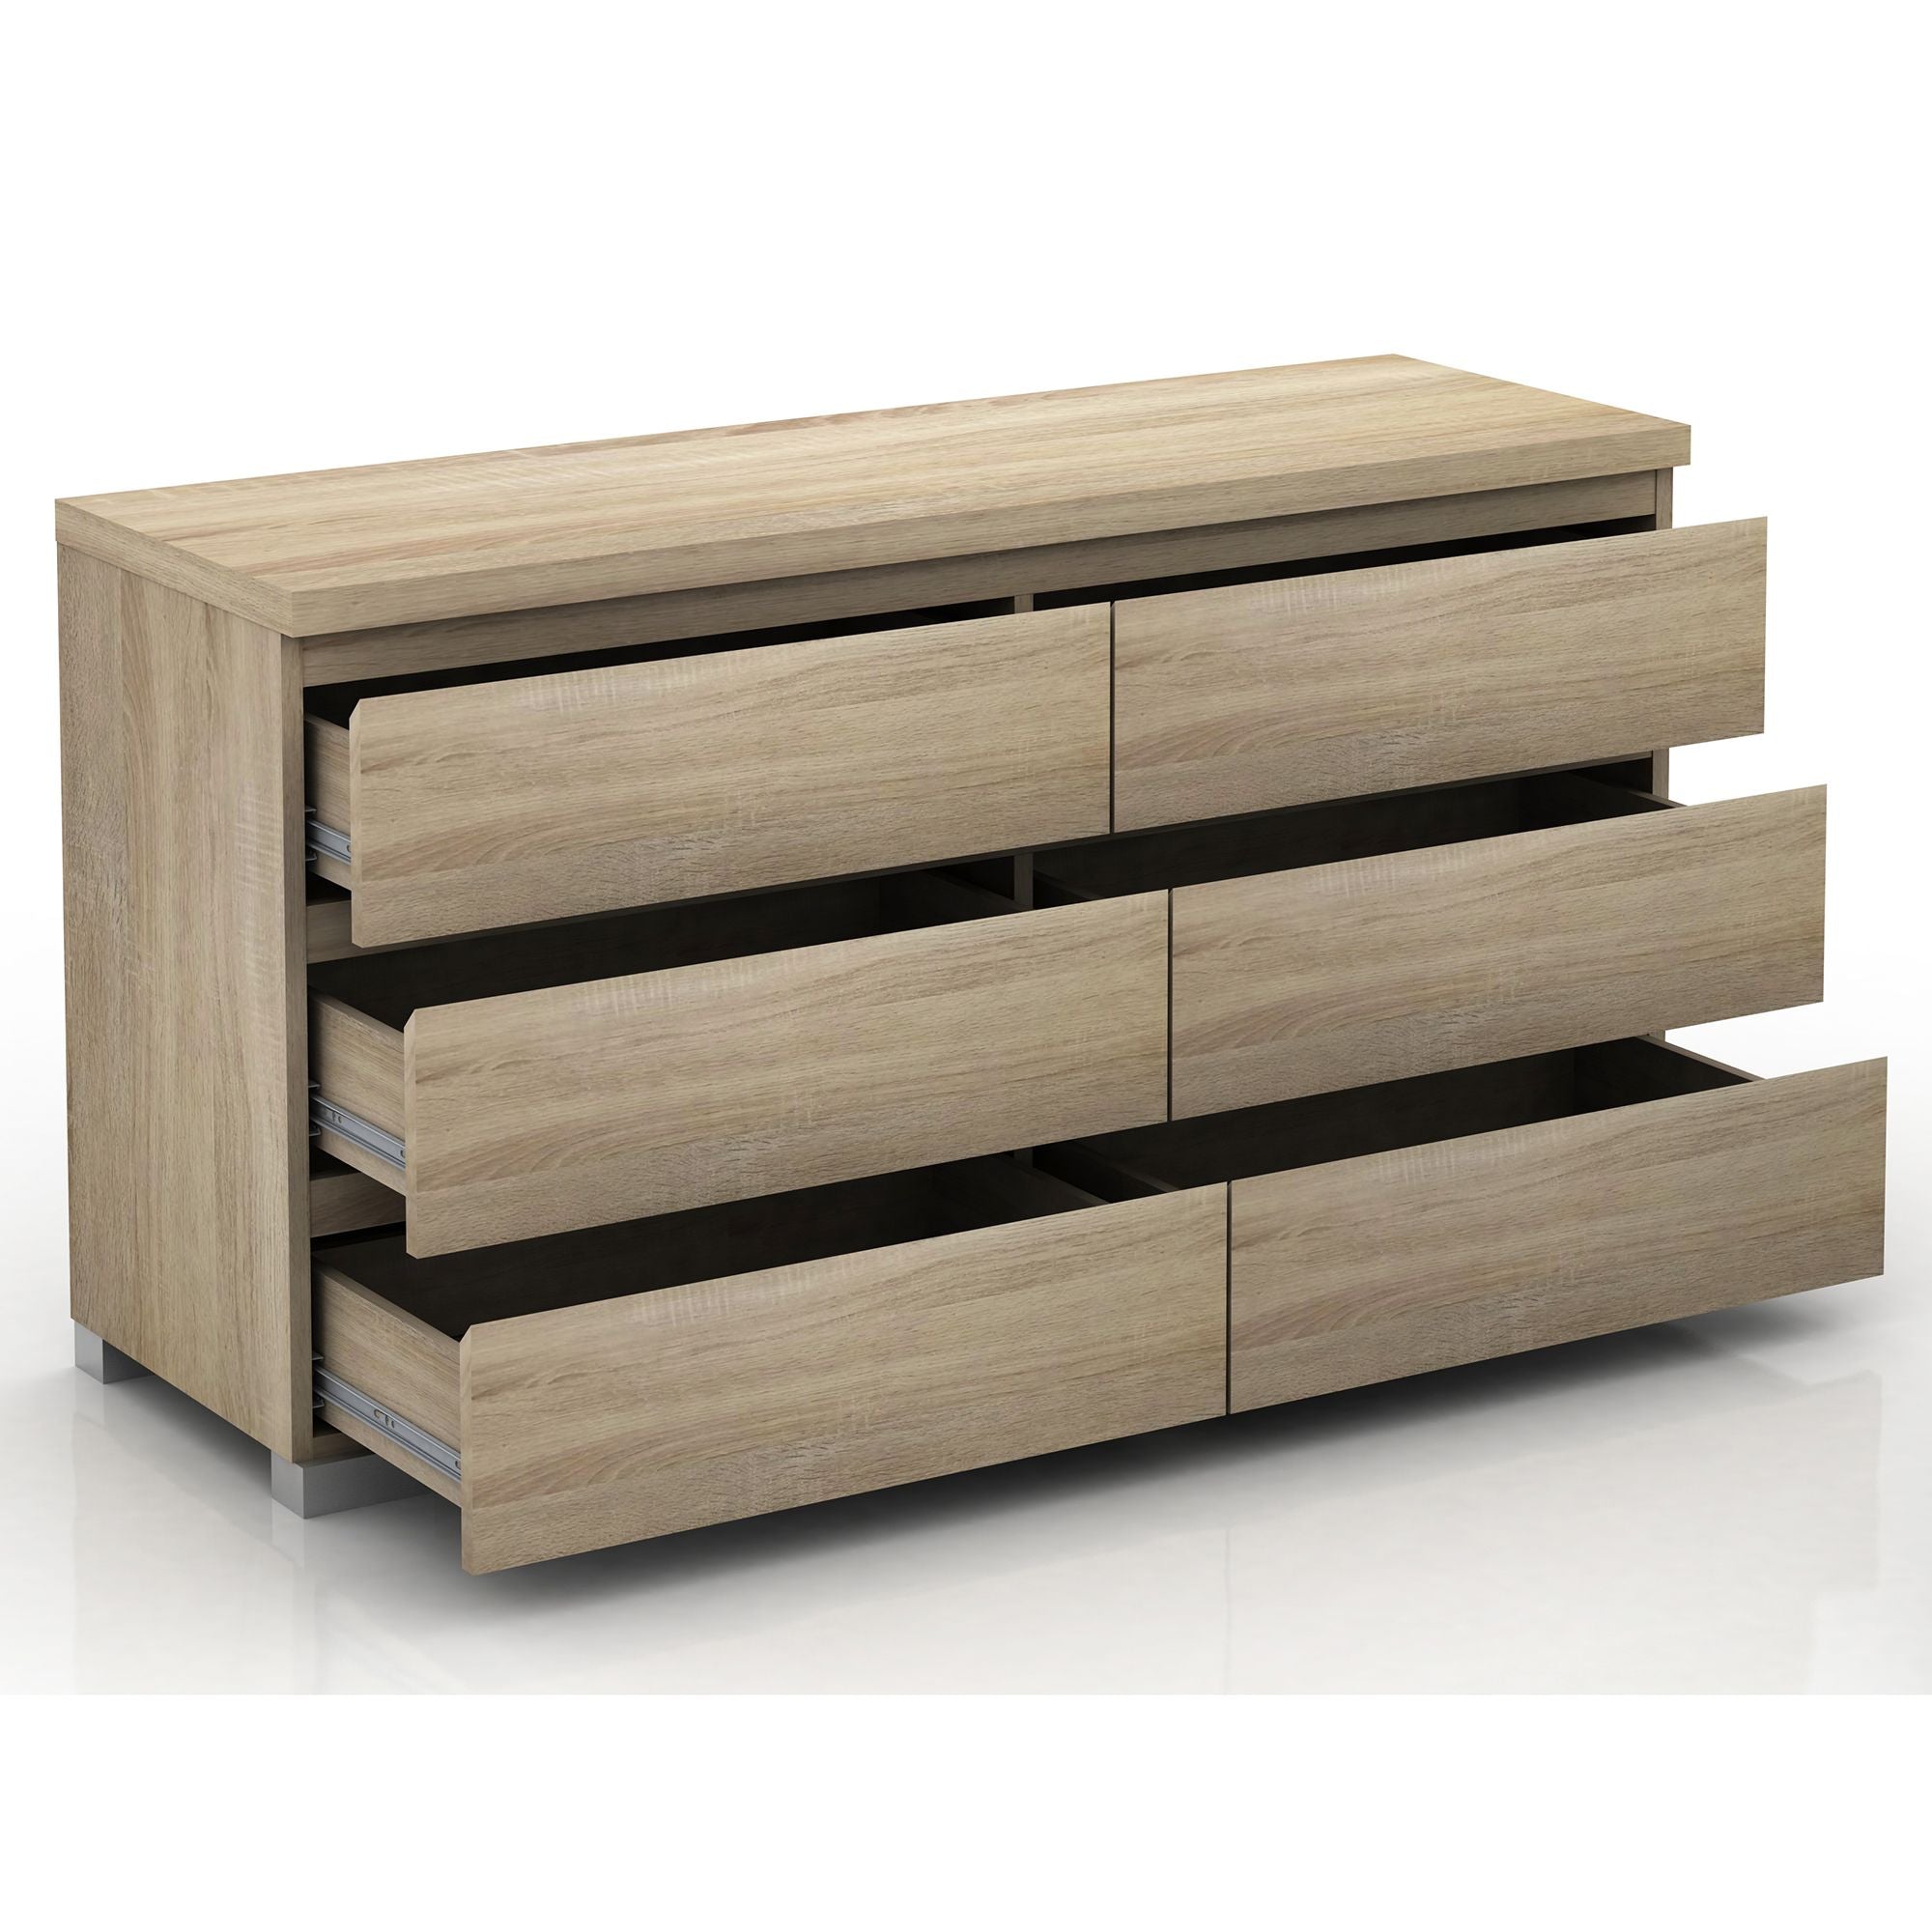 New model comes with light sonoma oak color drawers 